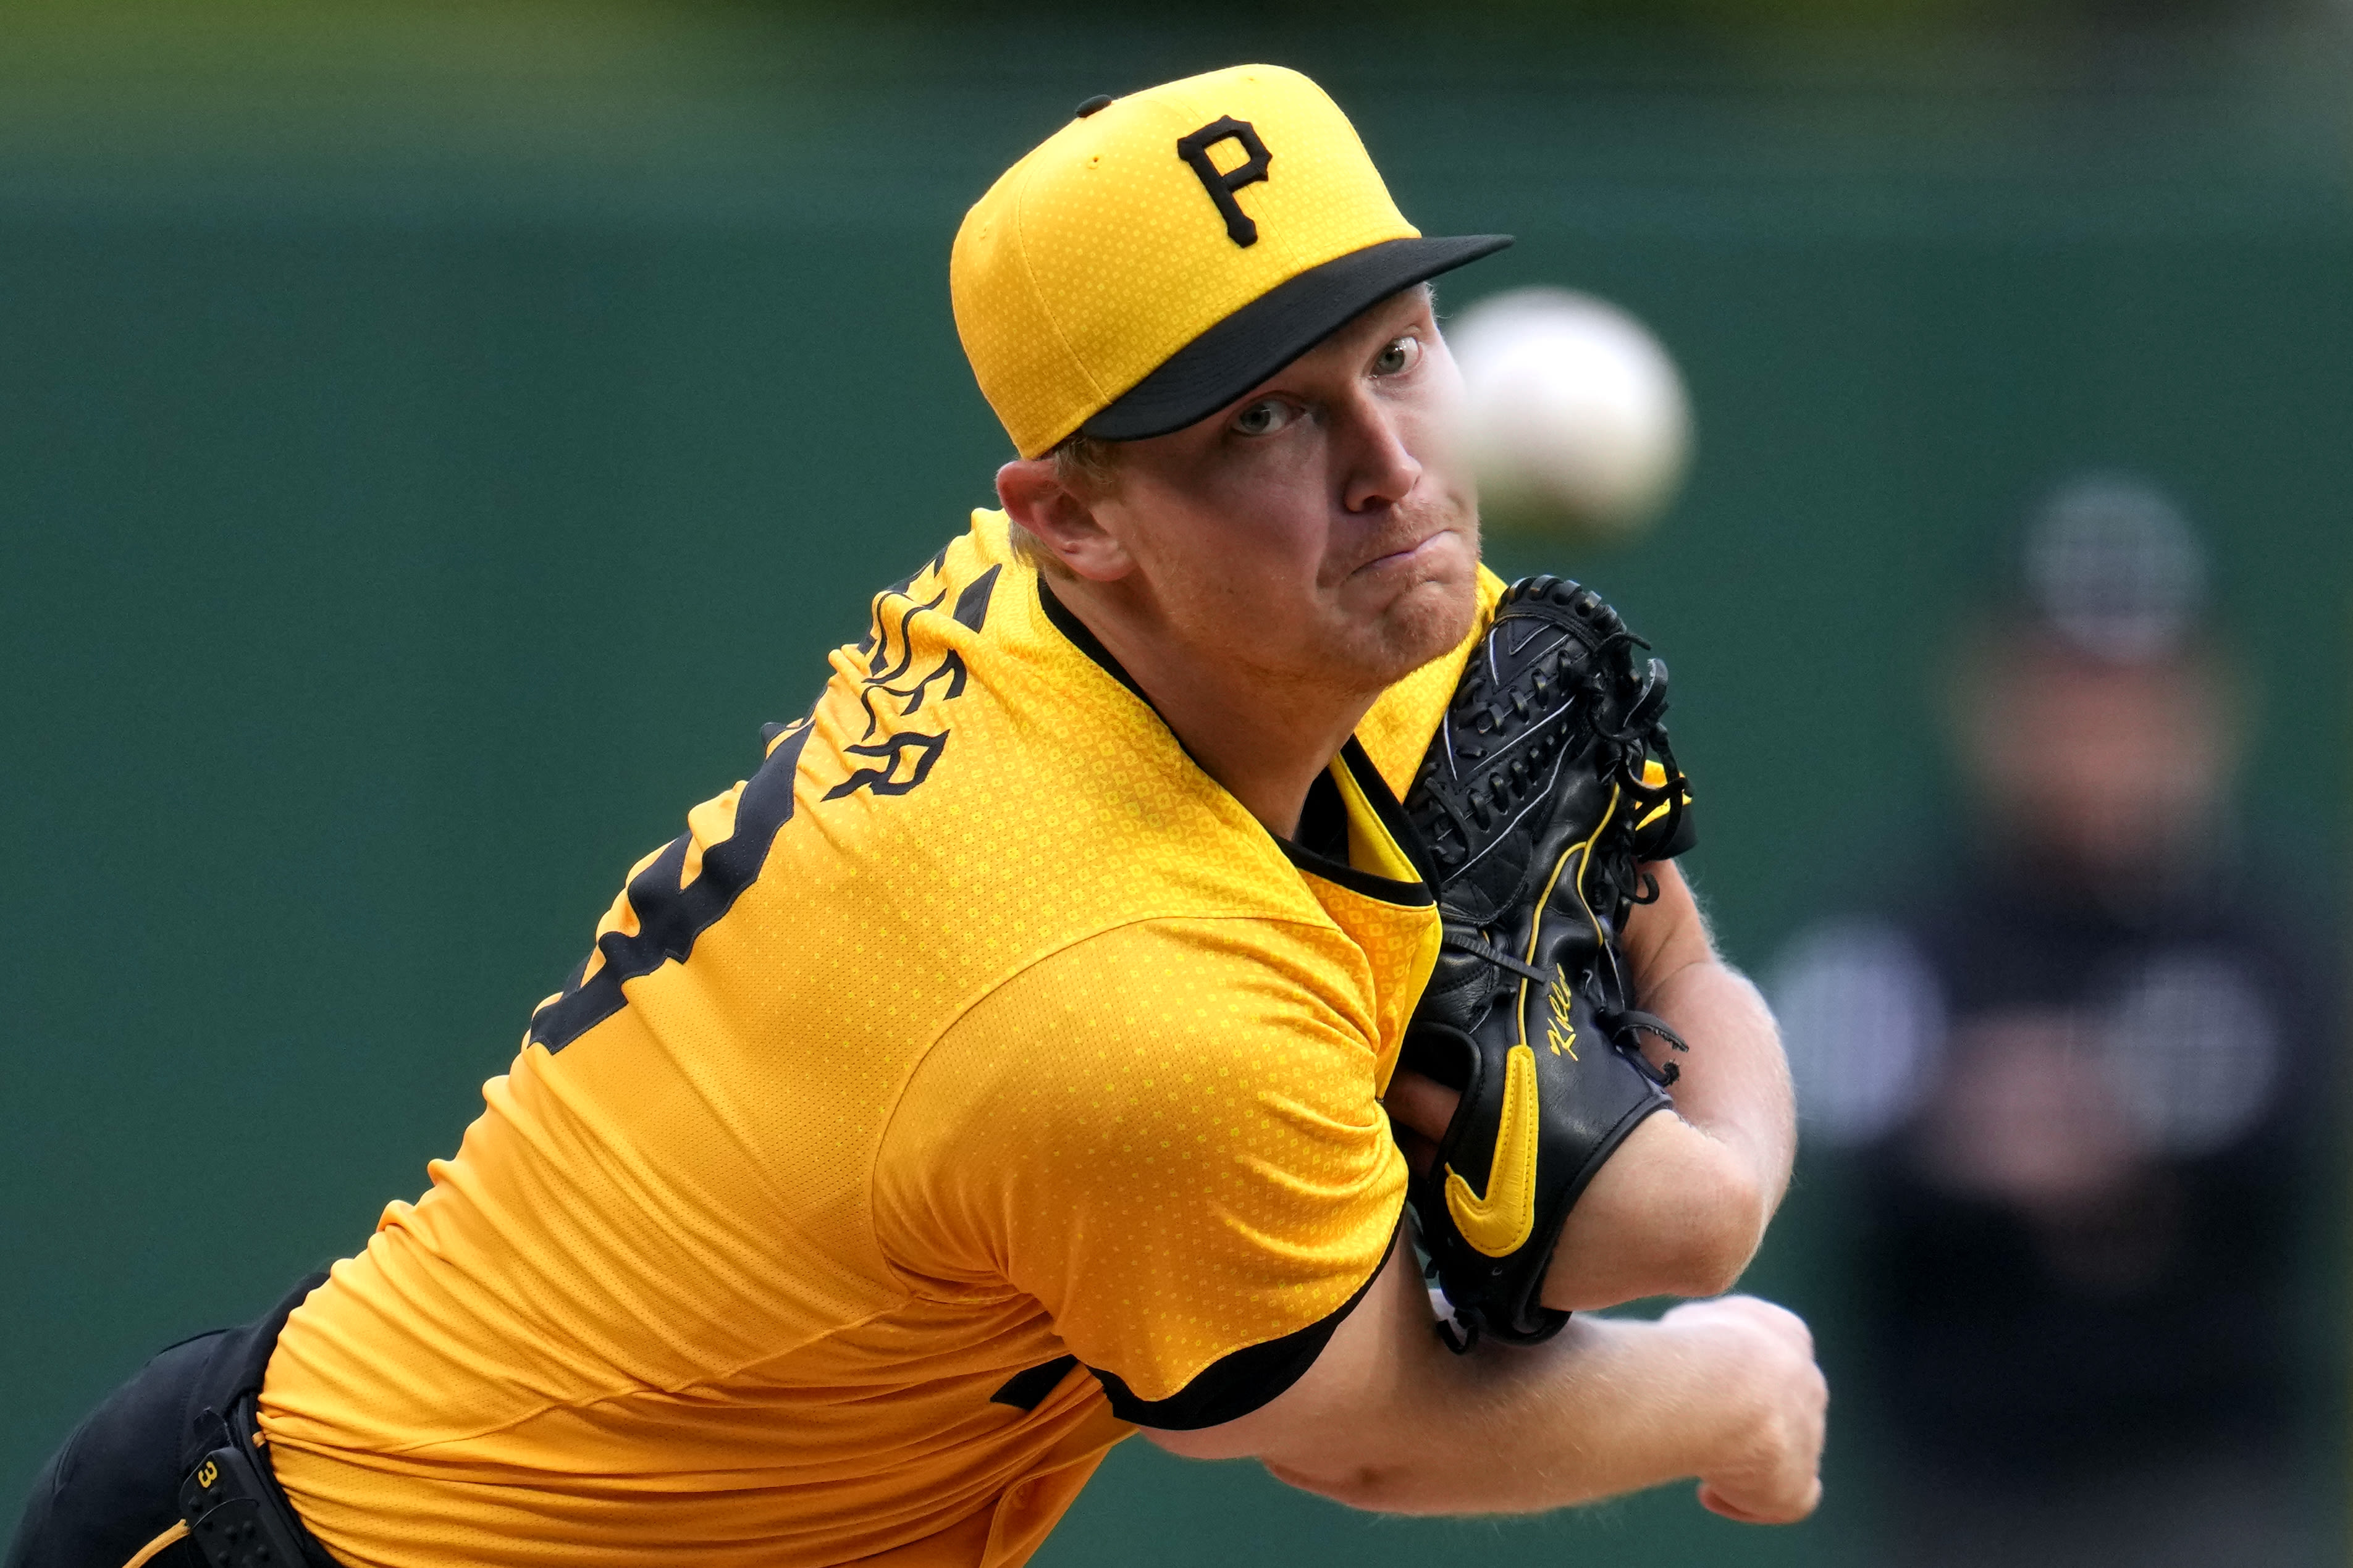 Mitch Keller wins his 6th straight start and Oneil Cruz homers again as Pirates blank Twins 3-0